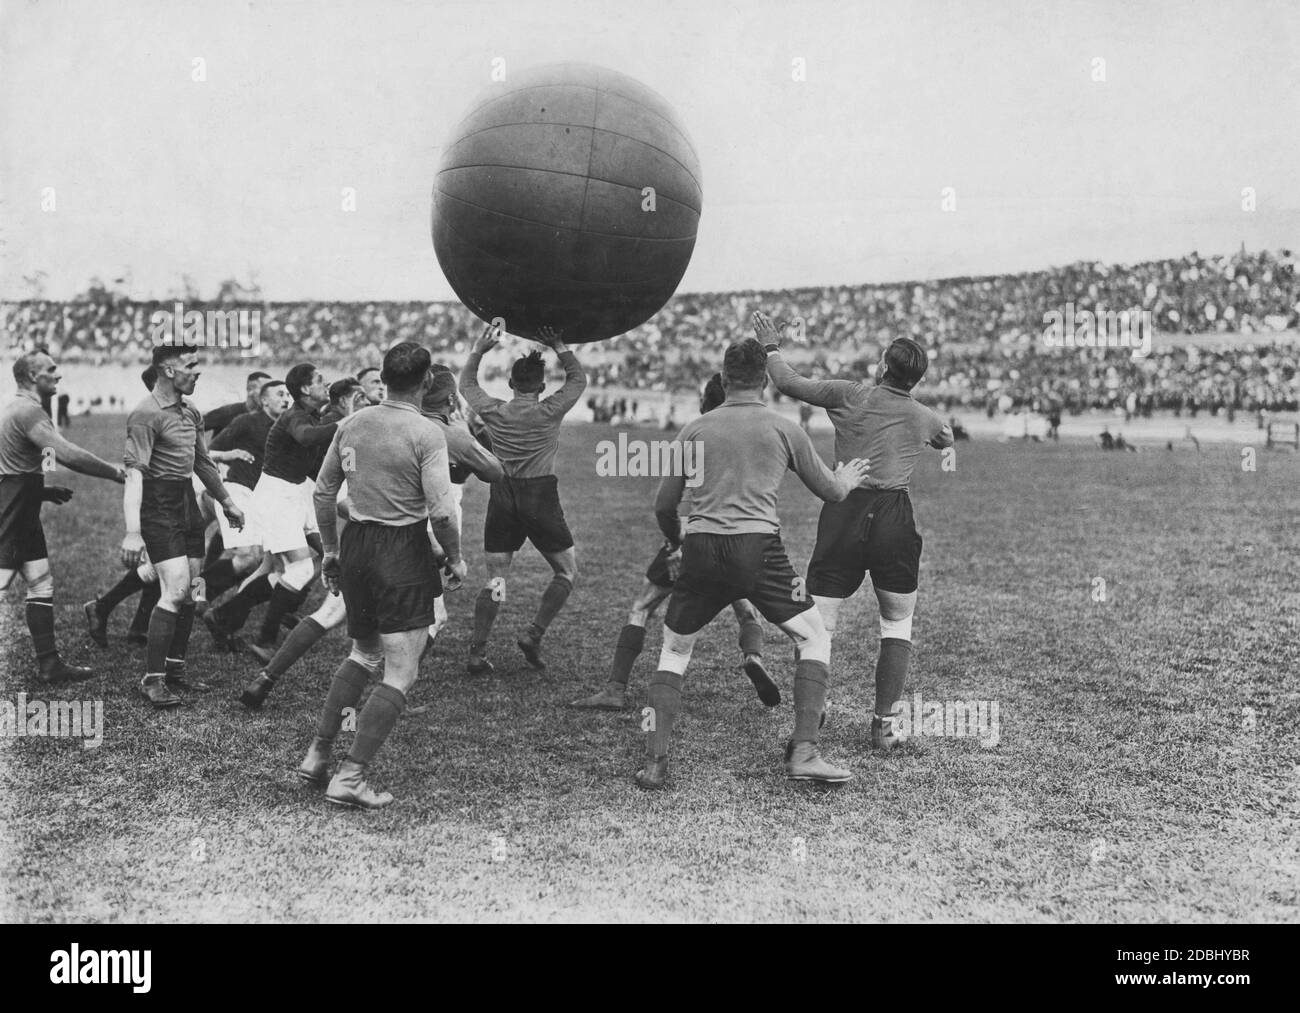 Pushball is played for the first time at the anniversary sports festival in the stadium. A 1.8 meter high and 23 kg heavy ball should be brought into the opponent's goal, whereby almost all techniques are allowed. In the photo the men crowd around the pushball, which they hold above their heads. The year 1924 is considered a sports year, as the Olympic Games, the Nordic World Ski Championships and the Chess Olympics are all taking place. Stock Photo